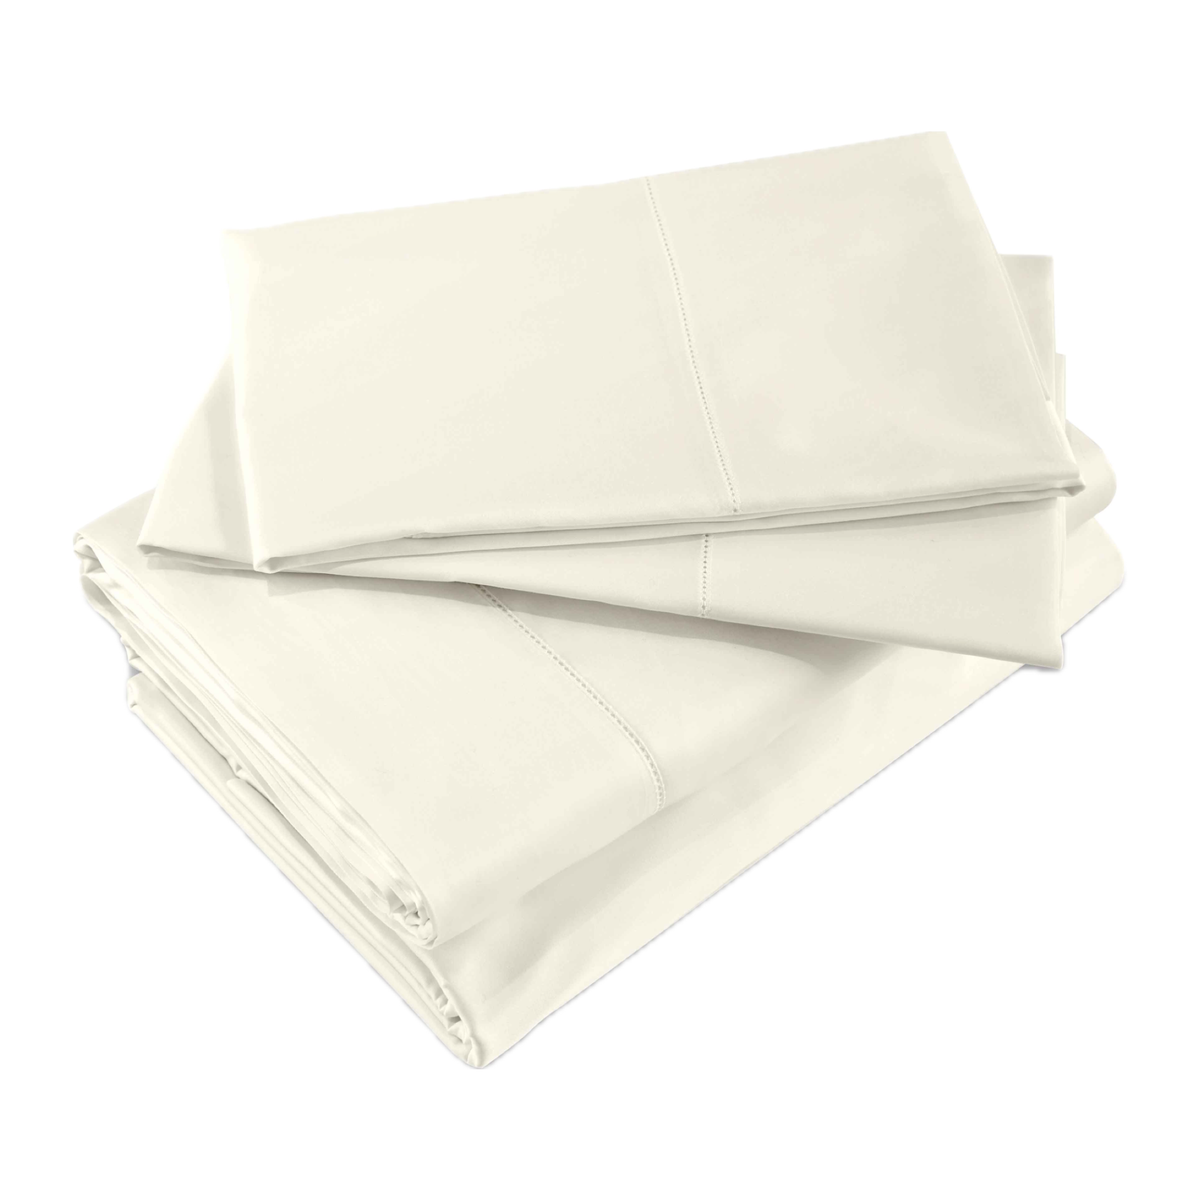 Sheet Set Silog of Signoria Nuvola Bedding in Ivory Color